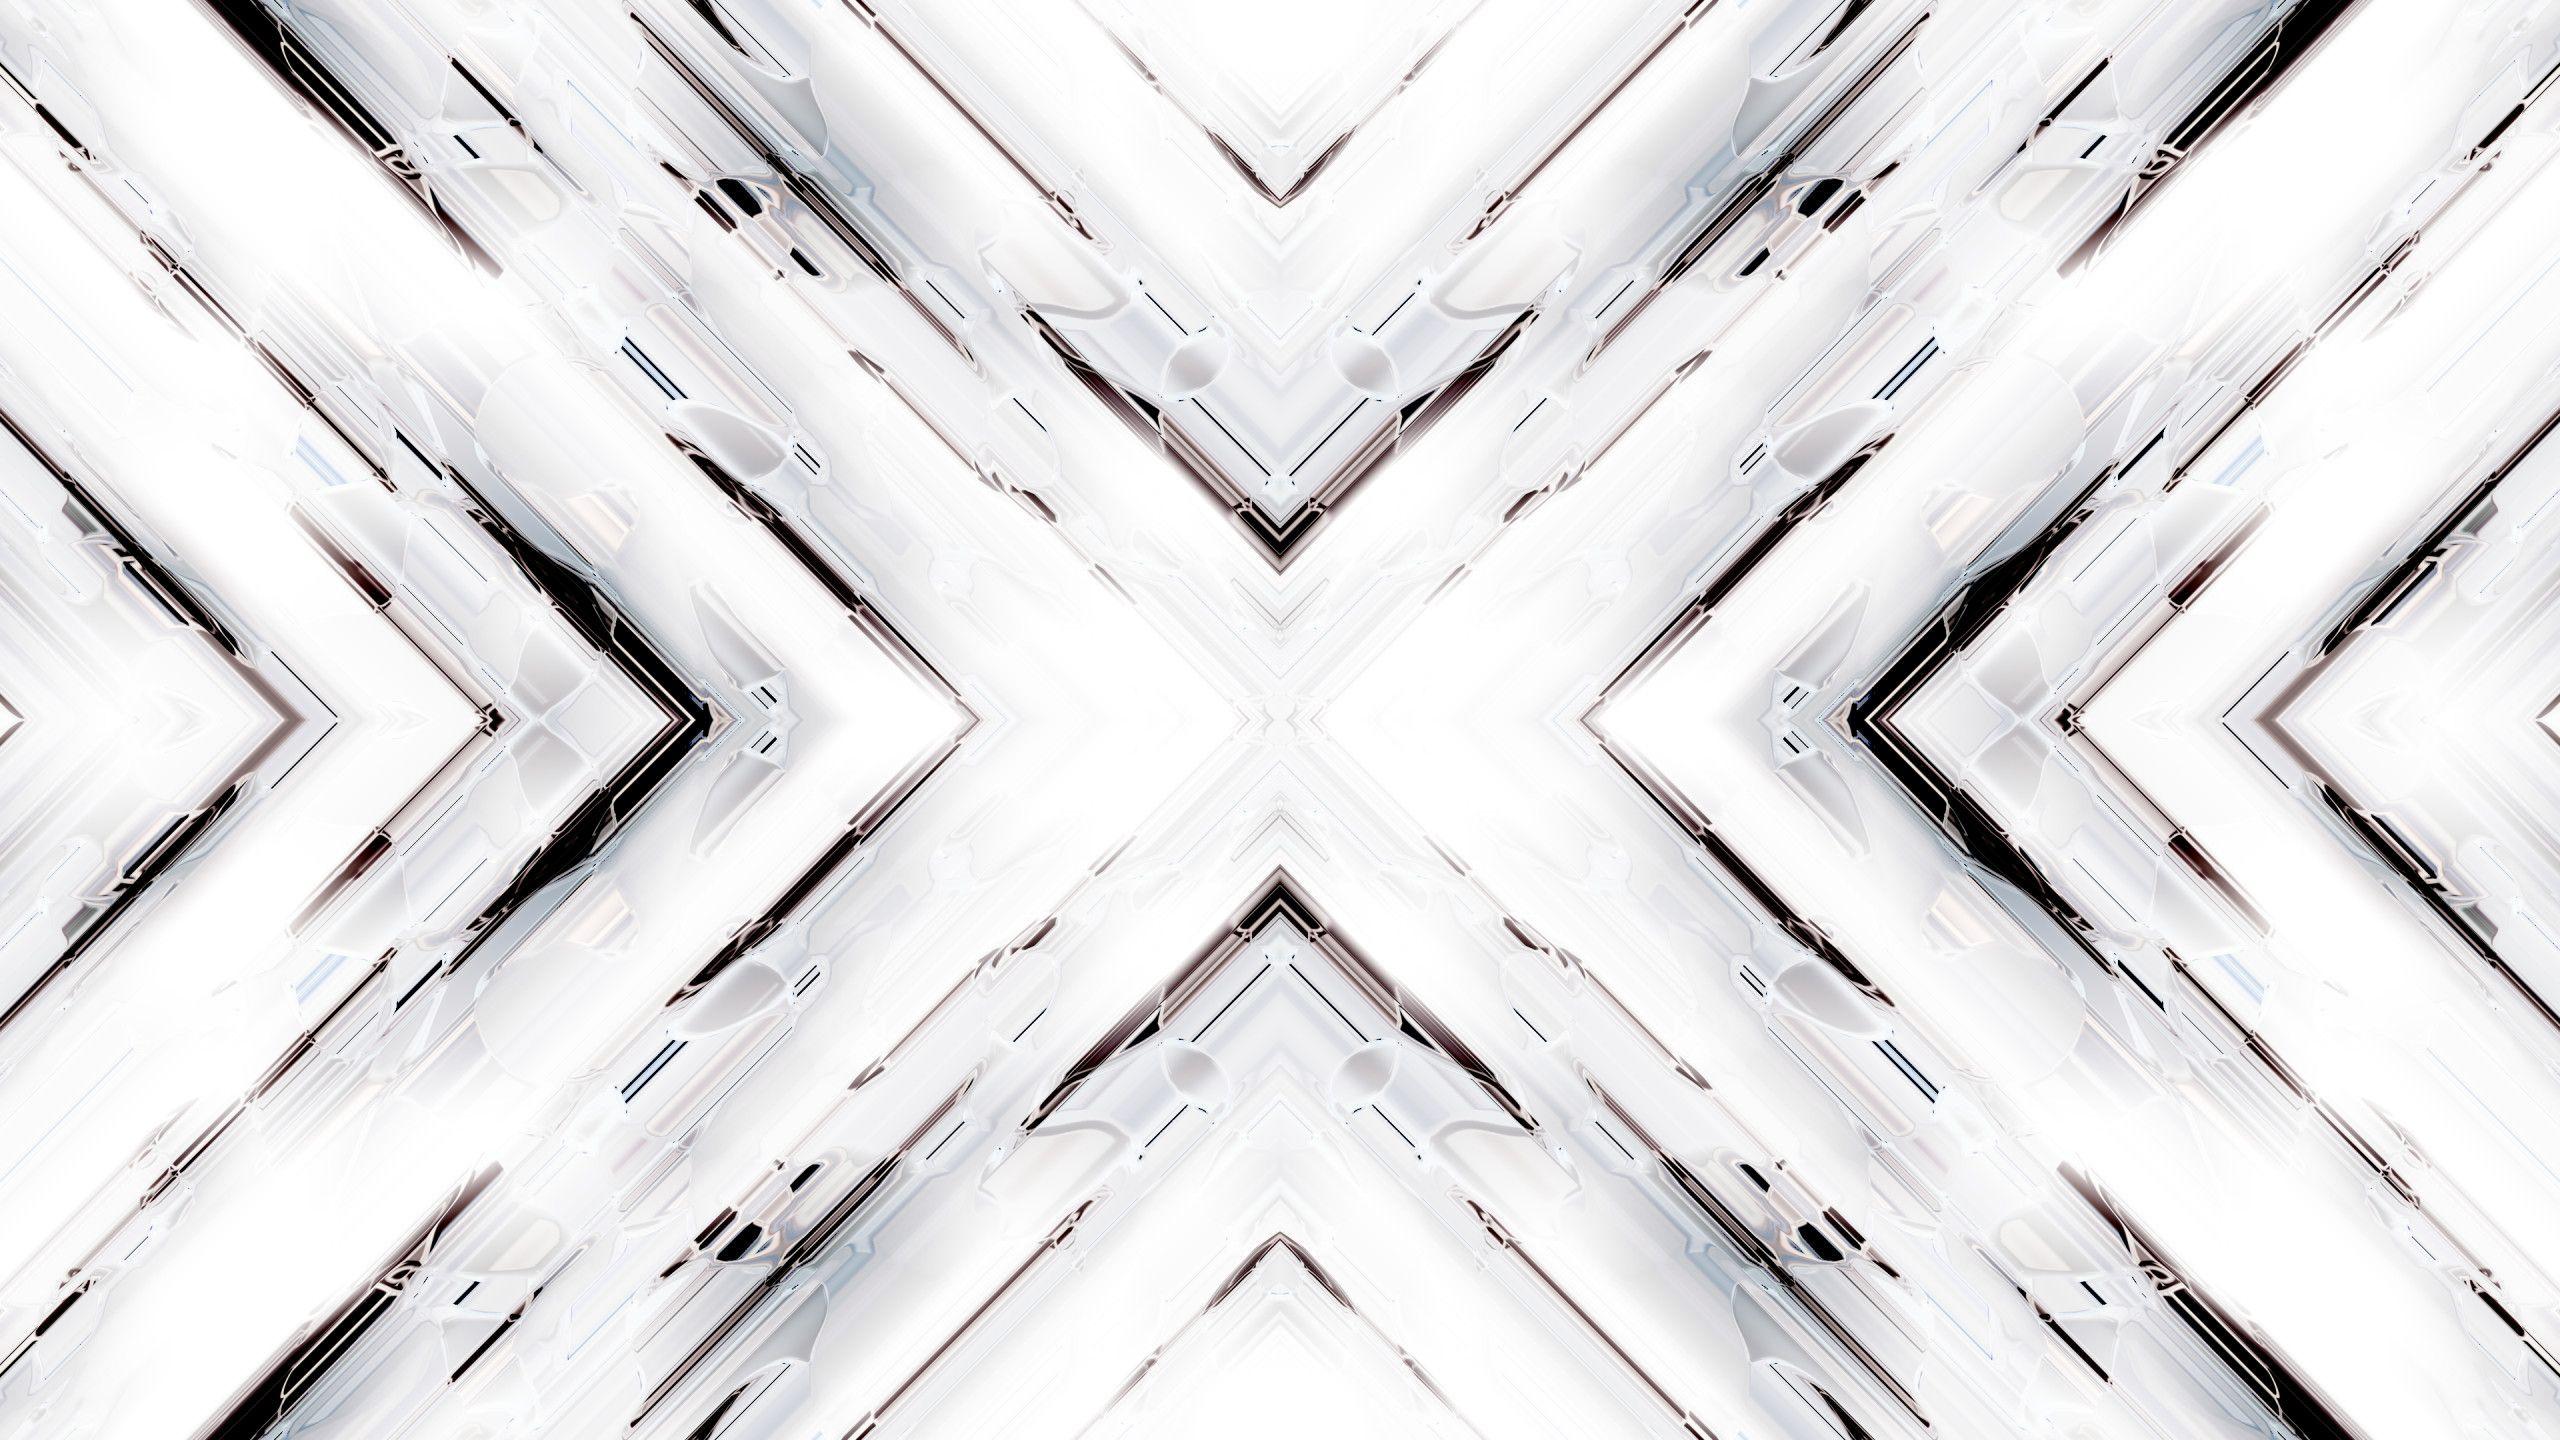 2560x1440 White Abstract Wallpapers Top Free 2560x1440 White Abstract